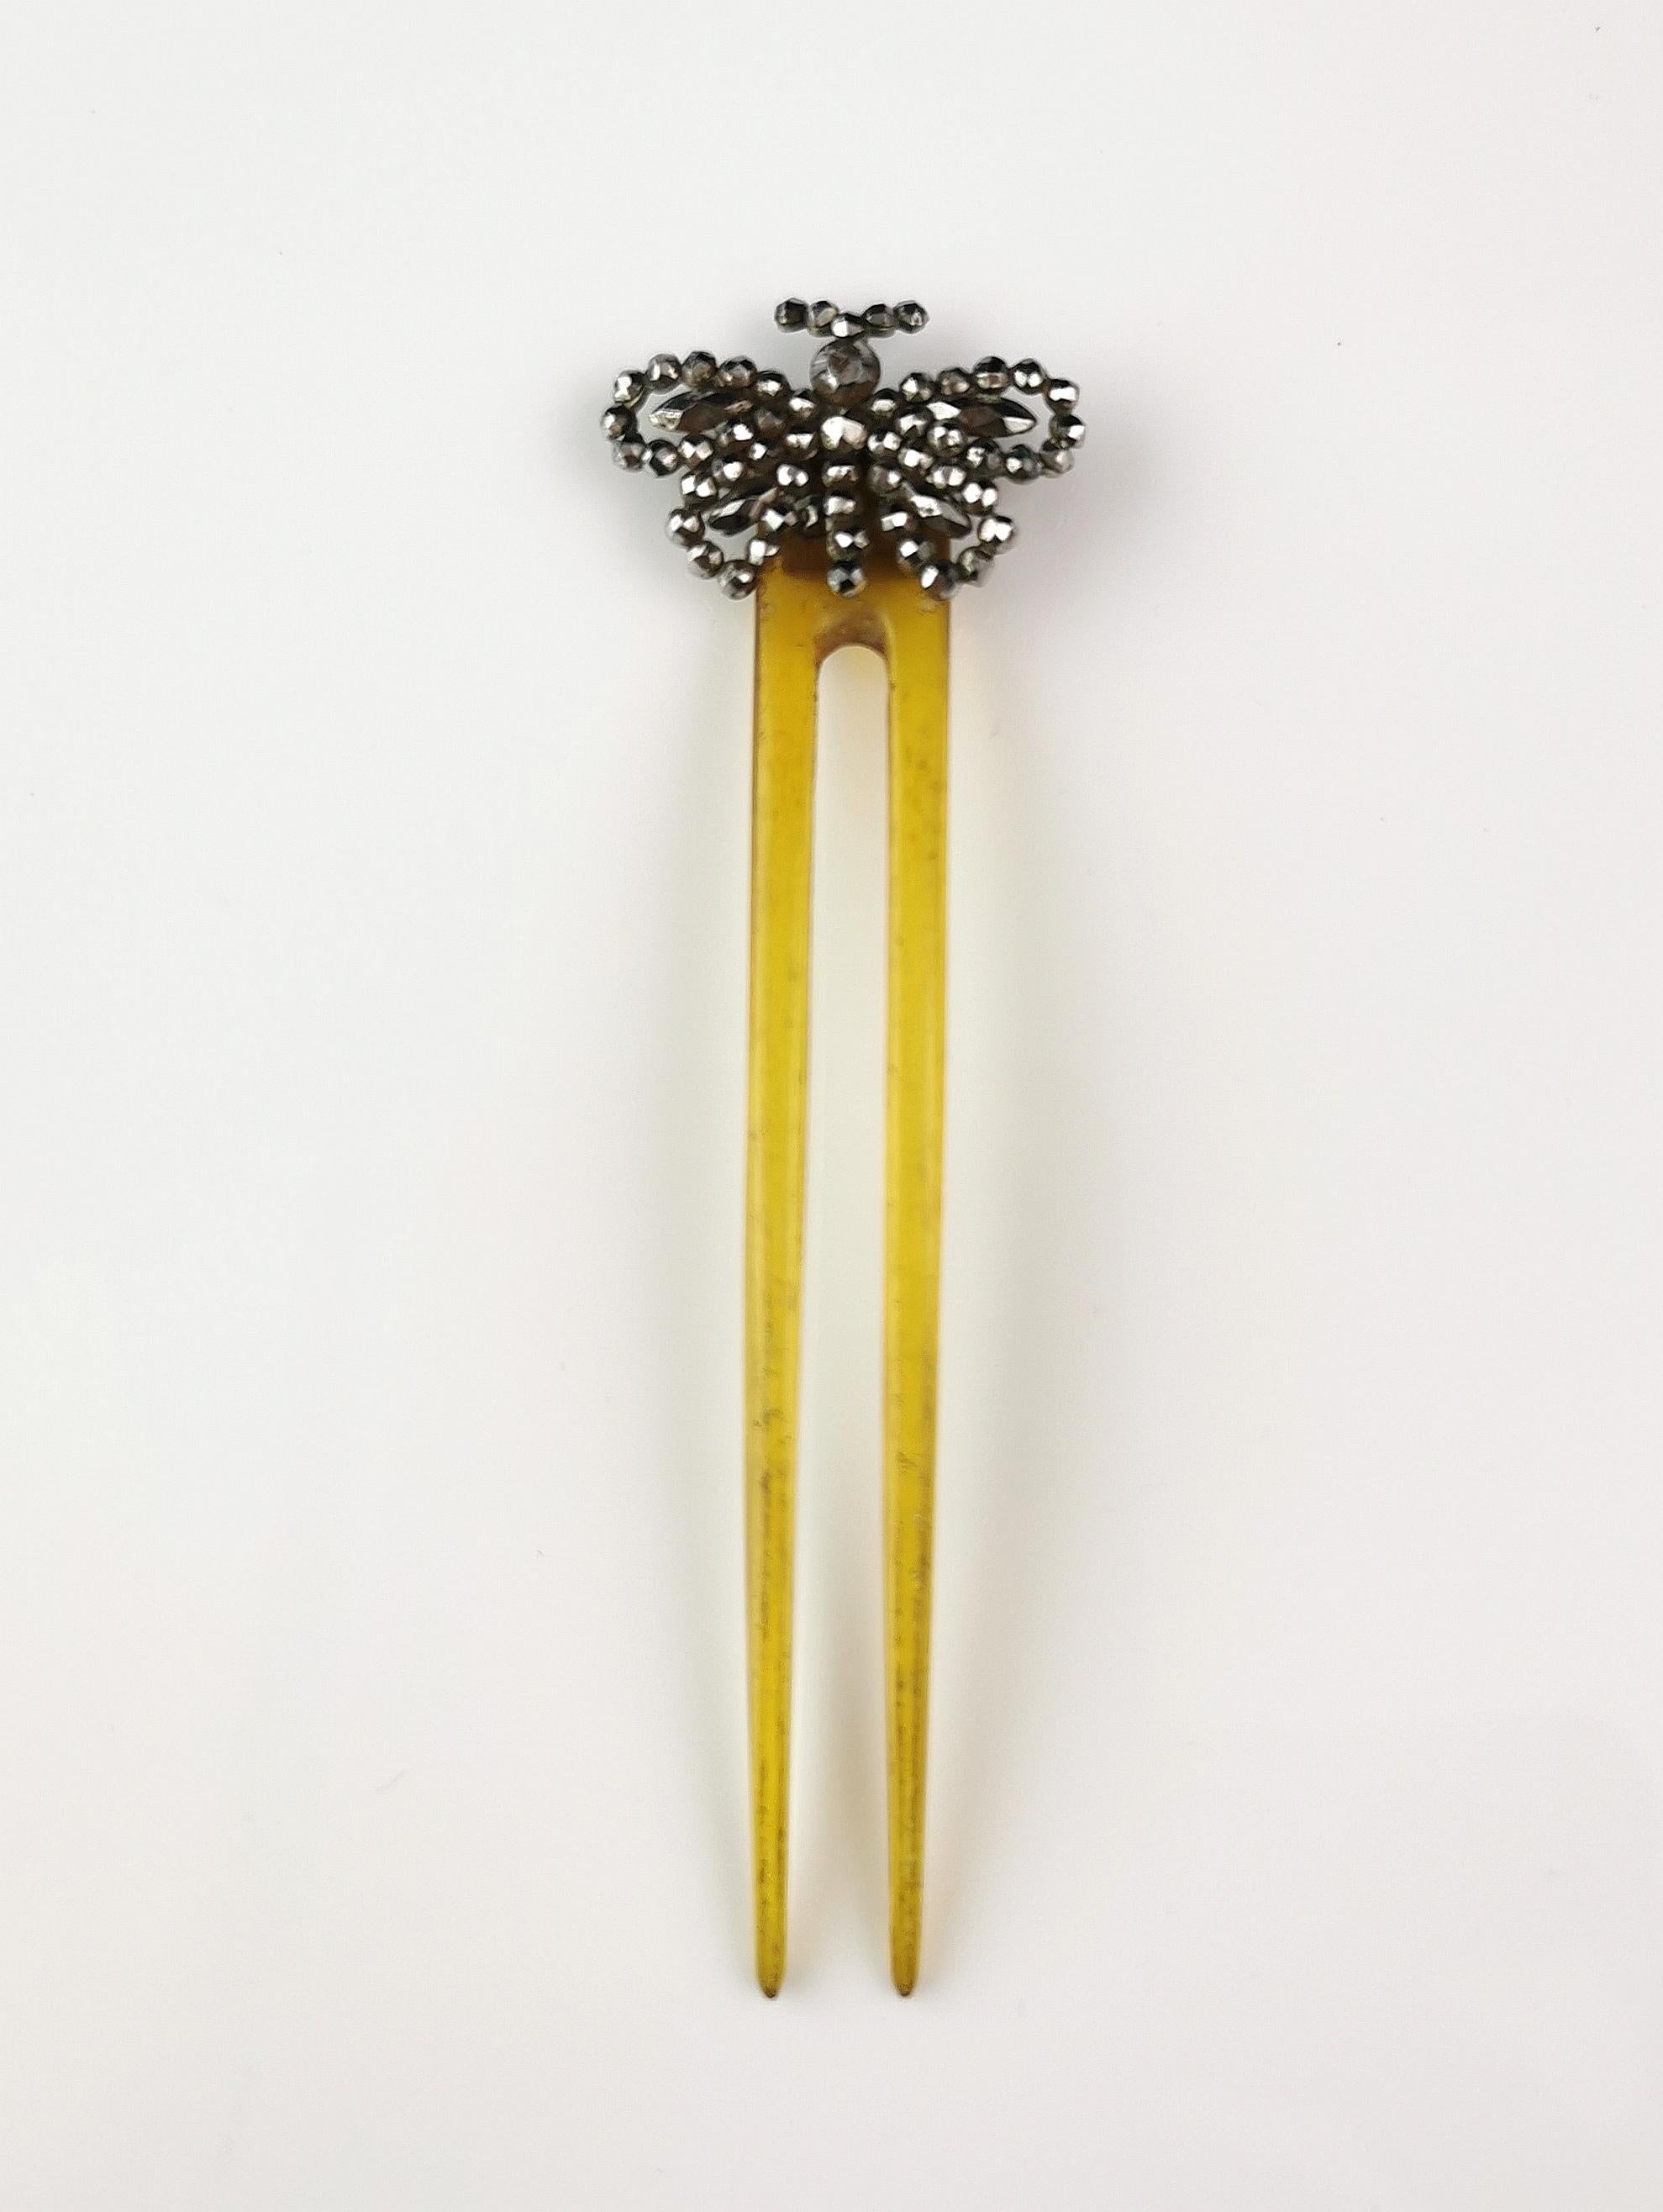 A gorgeous antique Victorian era hair comb.

It is a two pronged celluloid hair comb in a yellow shade.

The top is adorned with a pretty cut steel butterfly.

Cut steel was popularised in the 18th century, painstakingly hand cut and polished steel